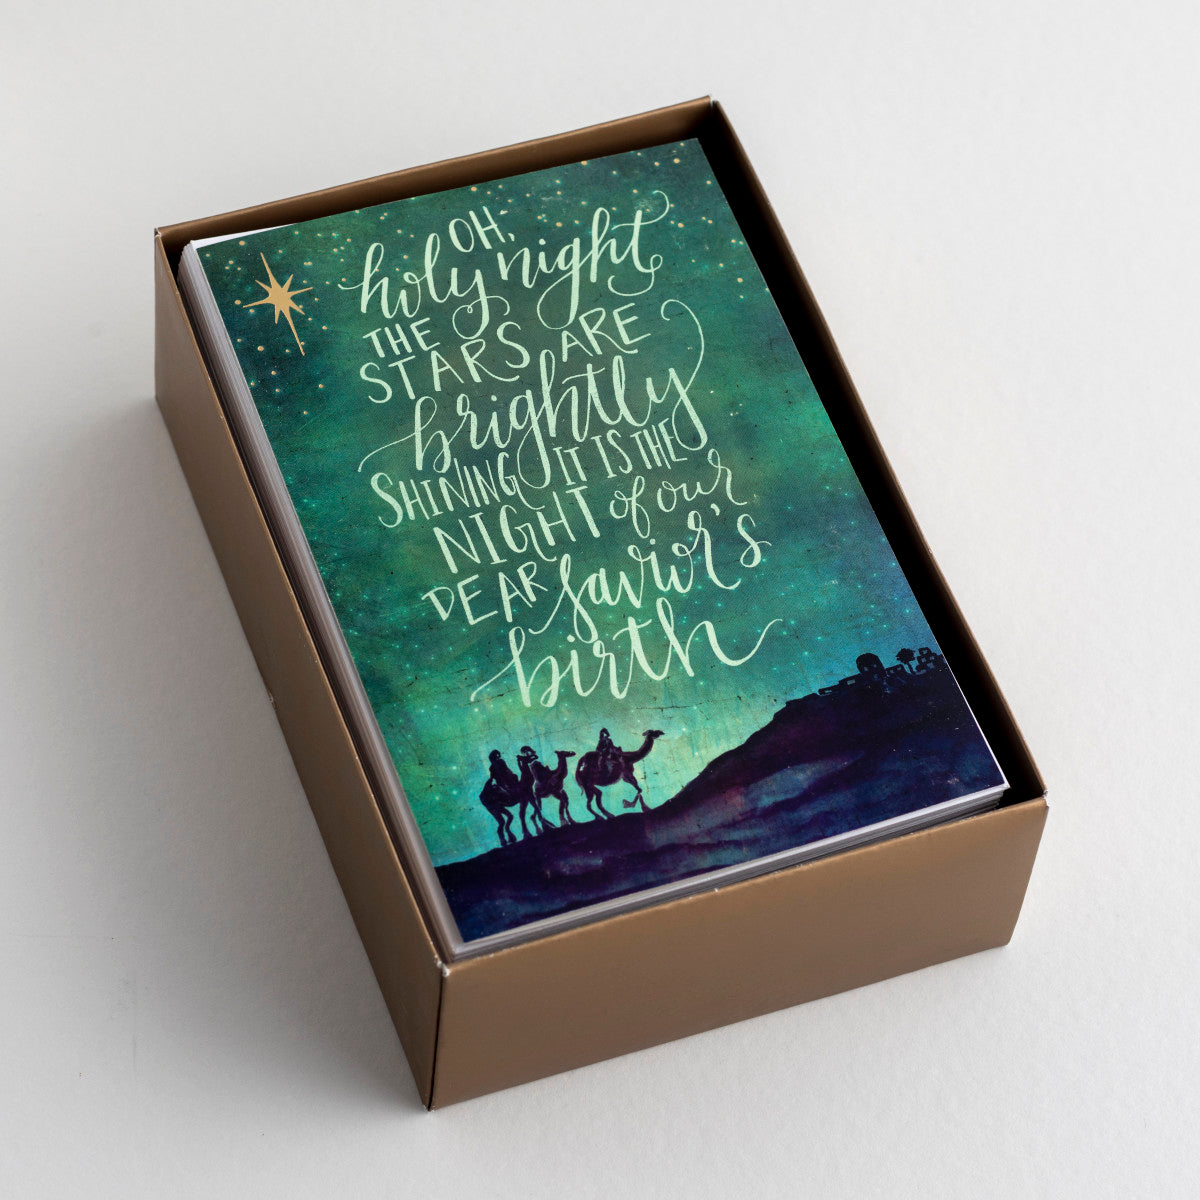 Christmas Cards - Oh Holy Night (50 cards) - The Christian Gift Company